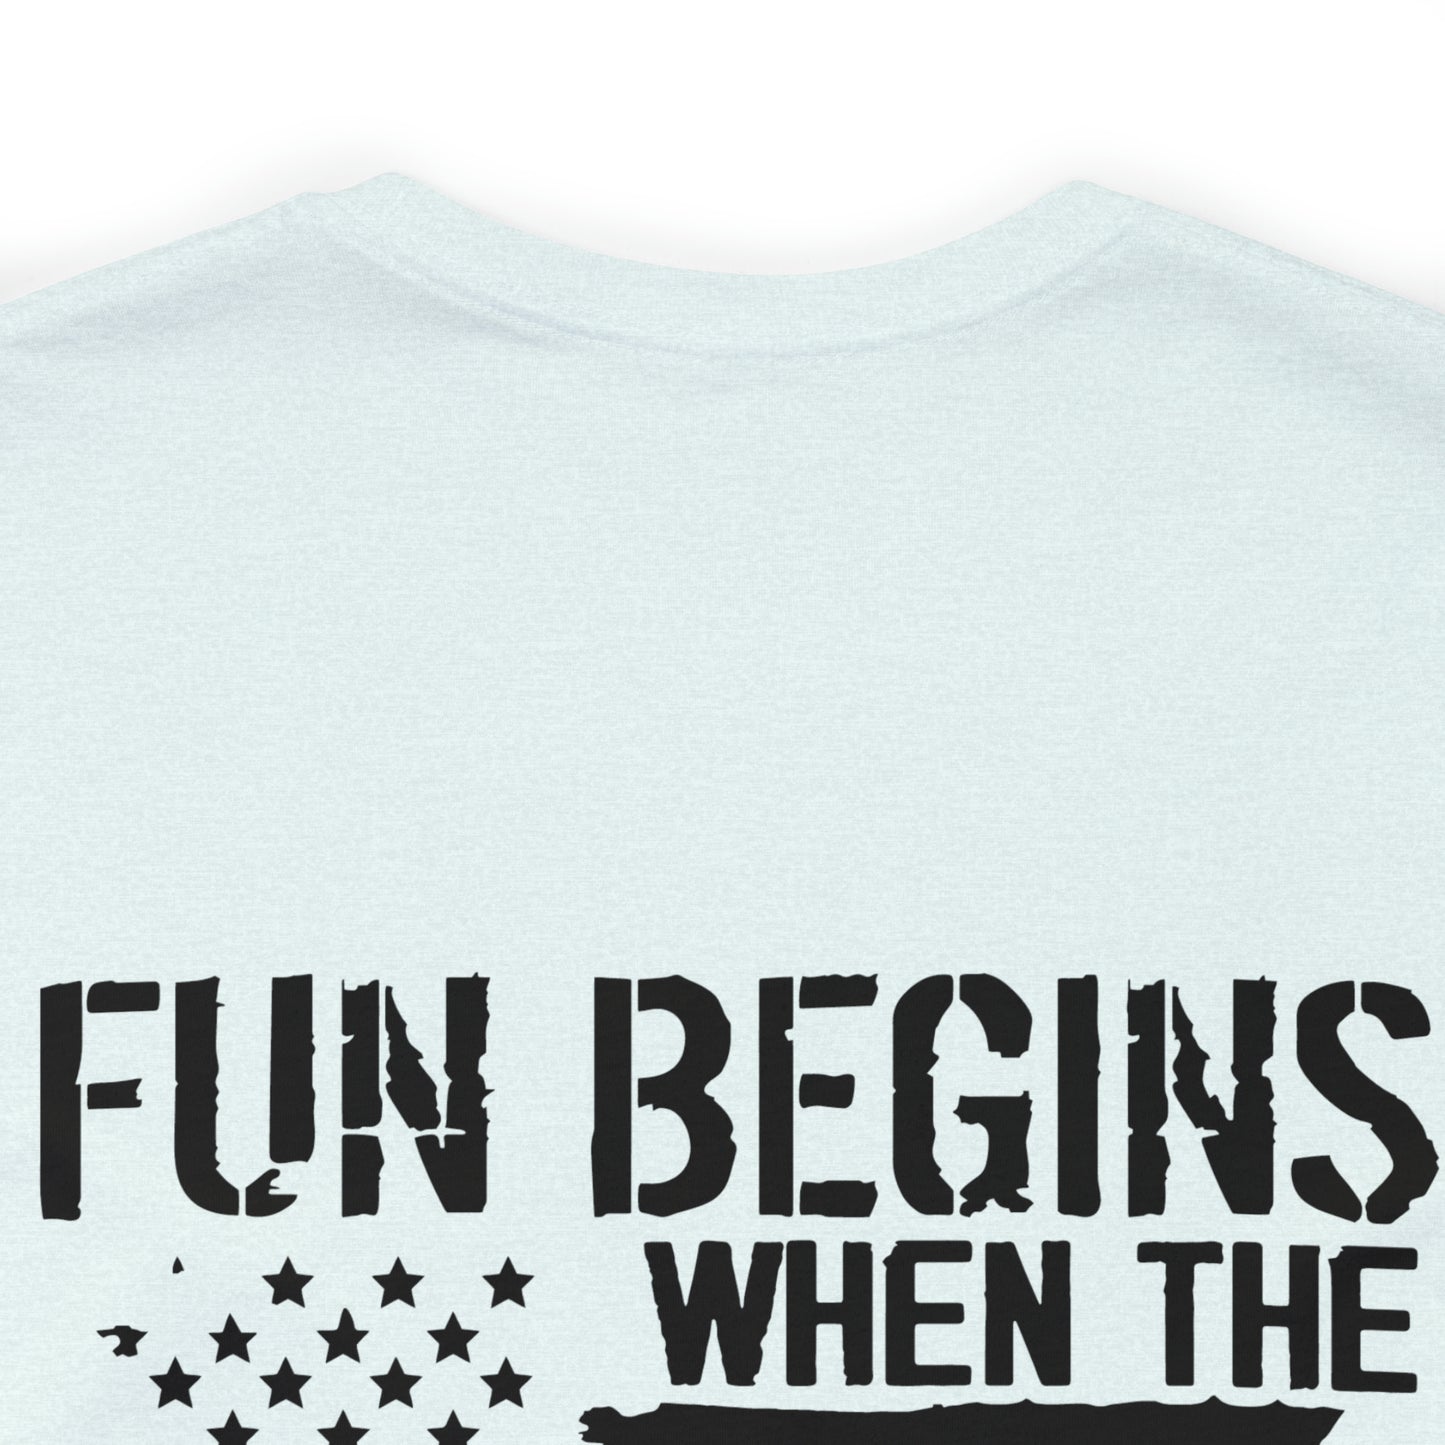 Pit Crew - Fun Begins Where The Road Ends | Unisex T-Shirt